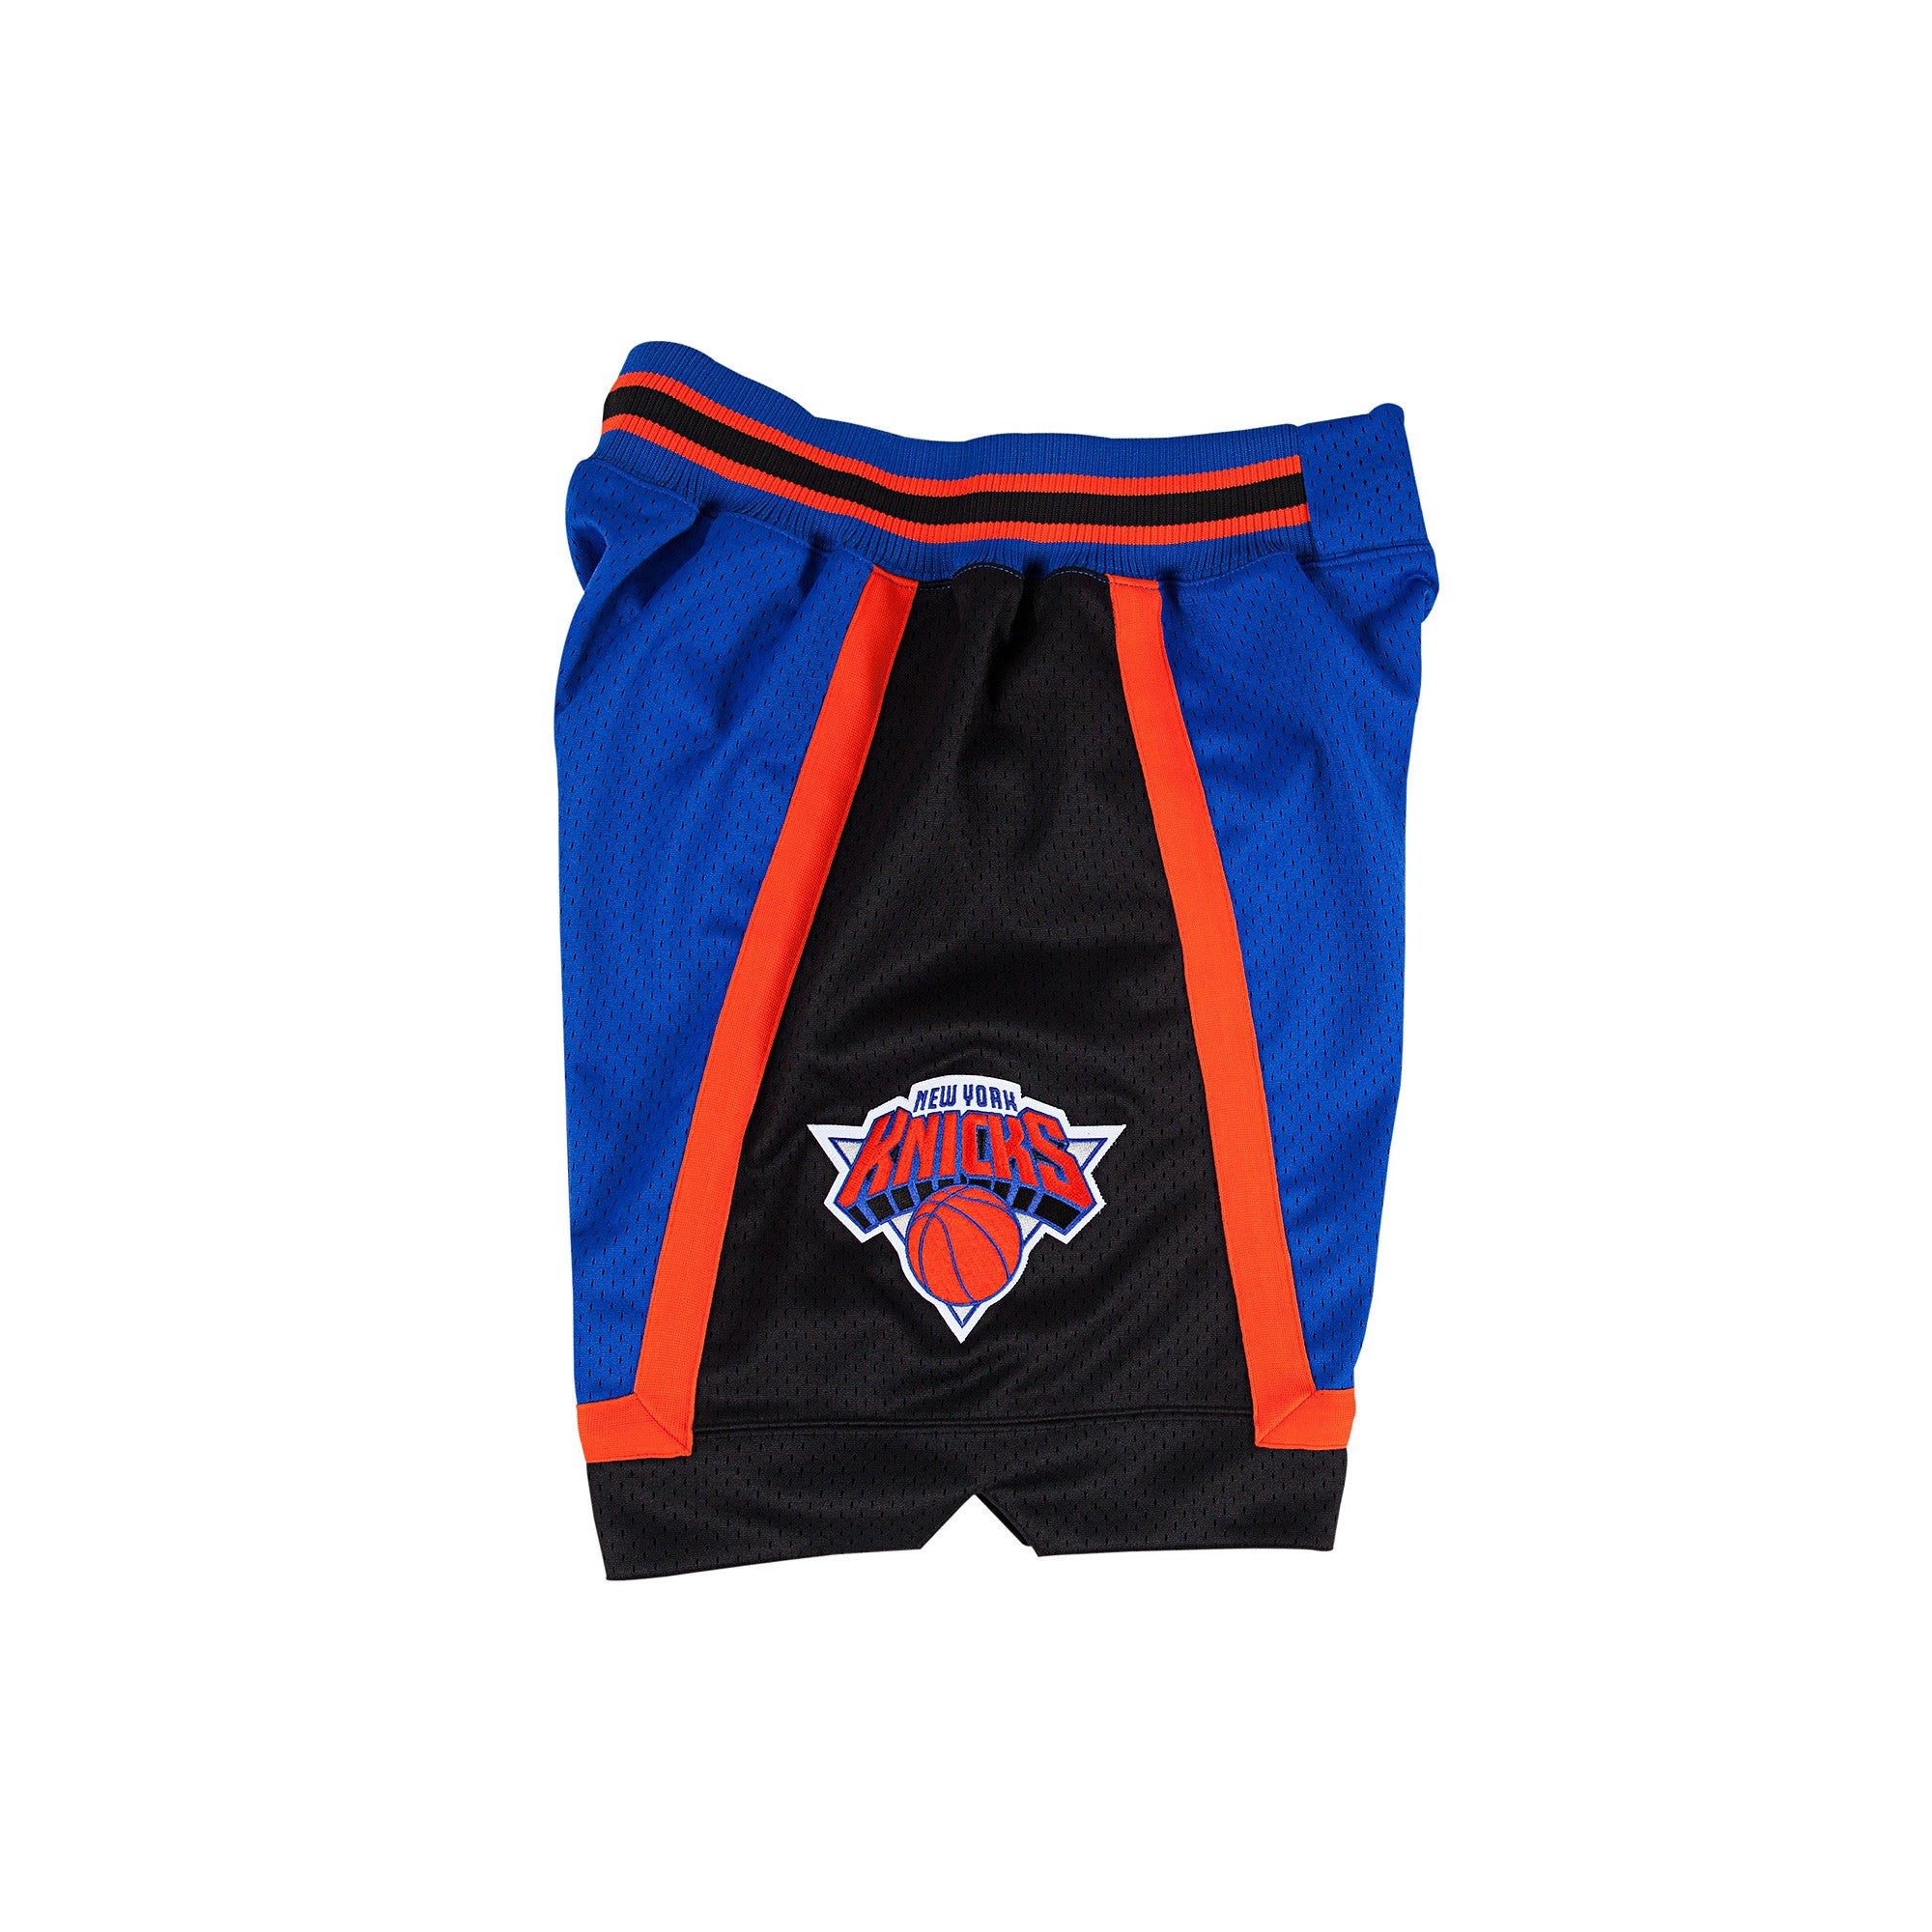 Mitchell and Ness Men's New York Knicks NBA 1996-97 Away Basketball Shorts in Blue/Black/Royal Blue Size XL | 100% Polyester